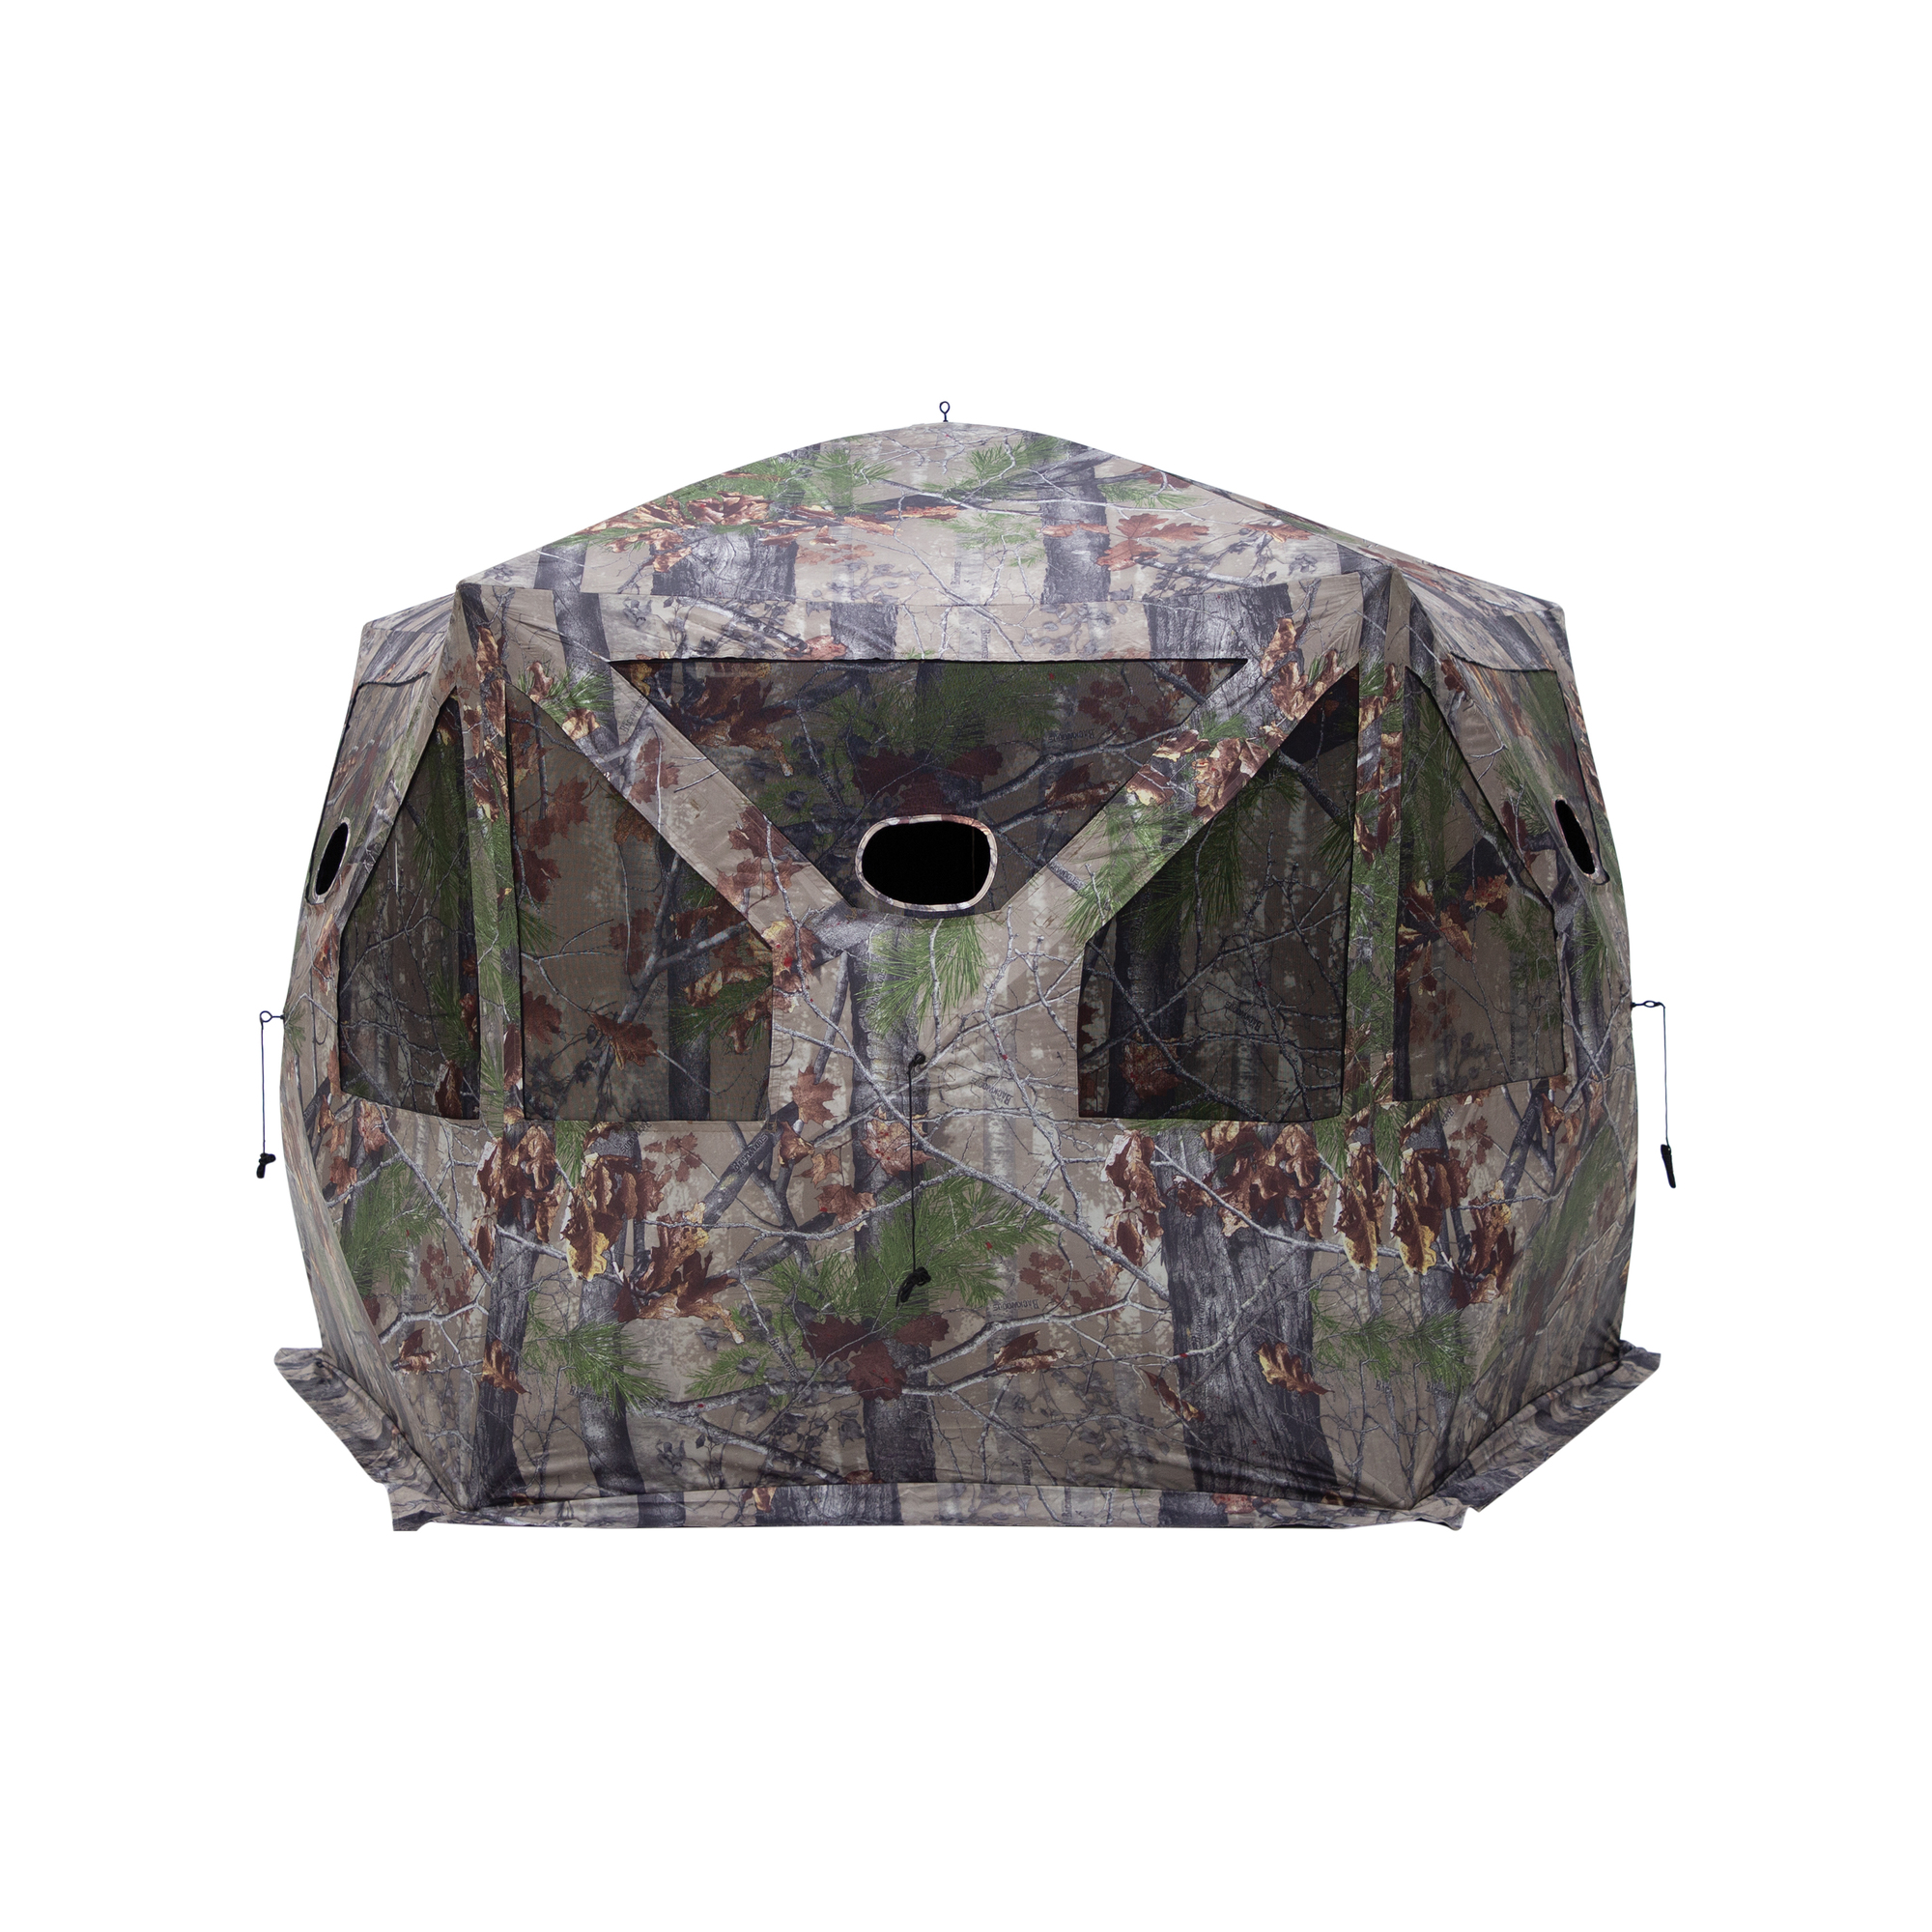 Barronett Blinds, Pentagon Hunting Hub Blind, 4-Person Capacity, Color Camouflage, Material Polyester, Model PT550BW